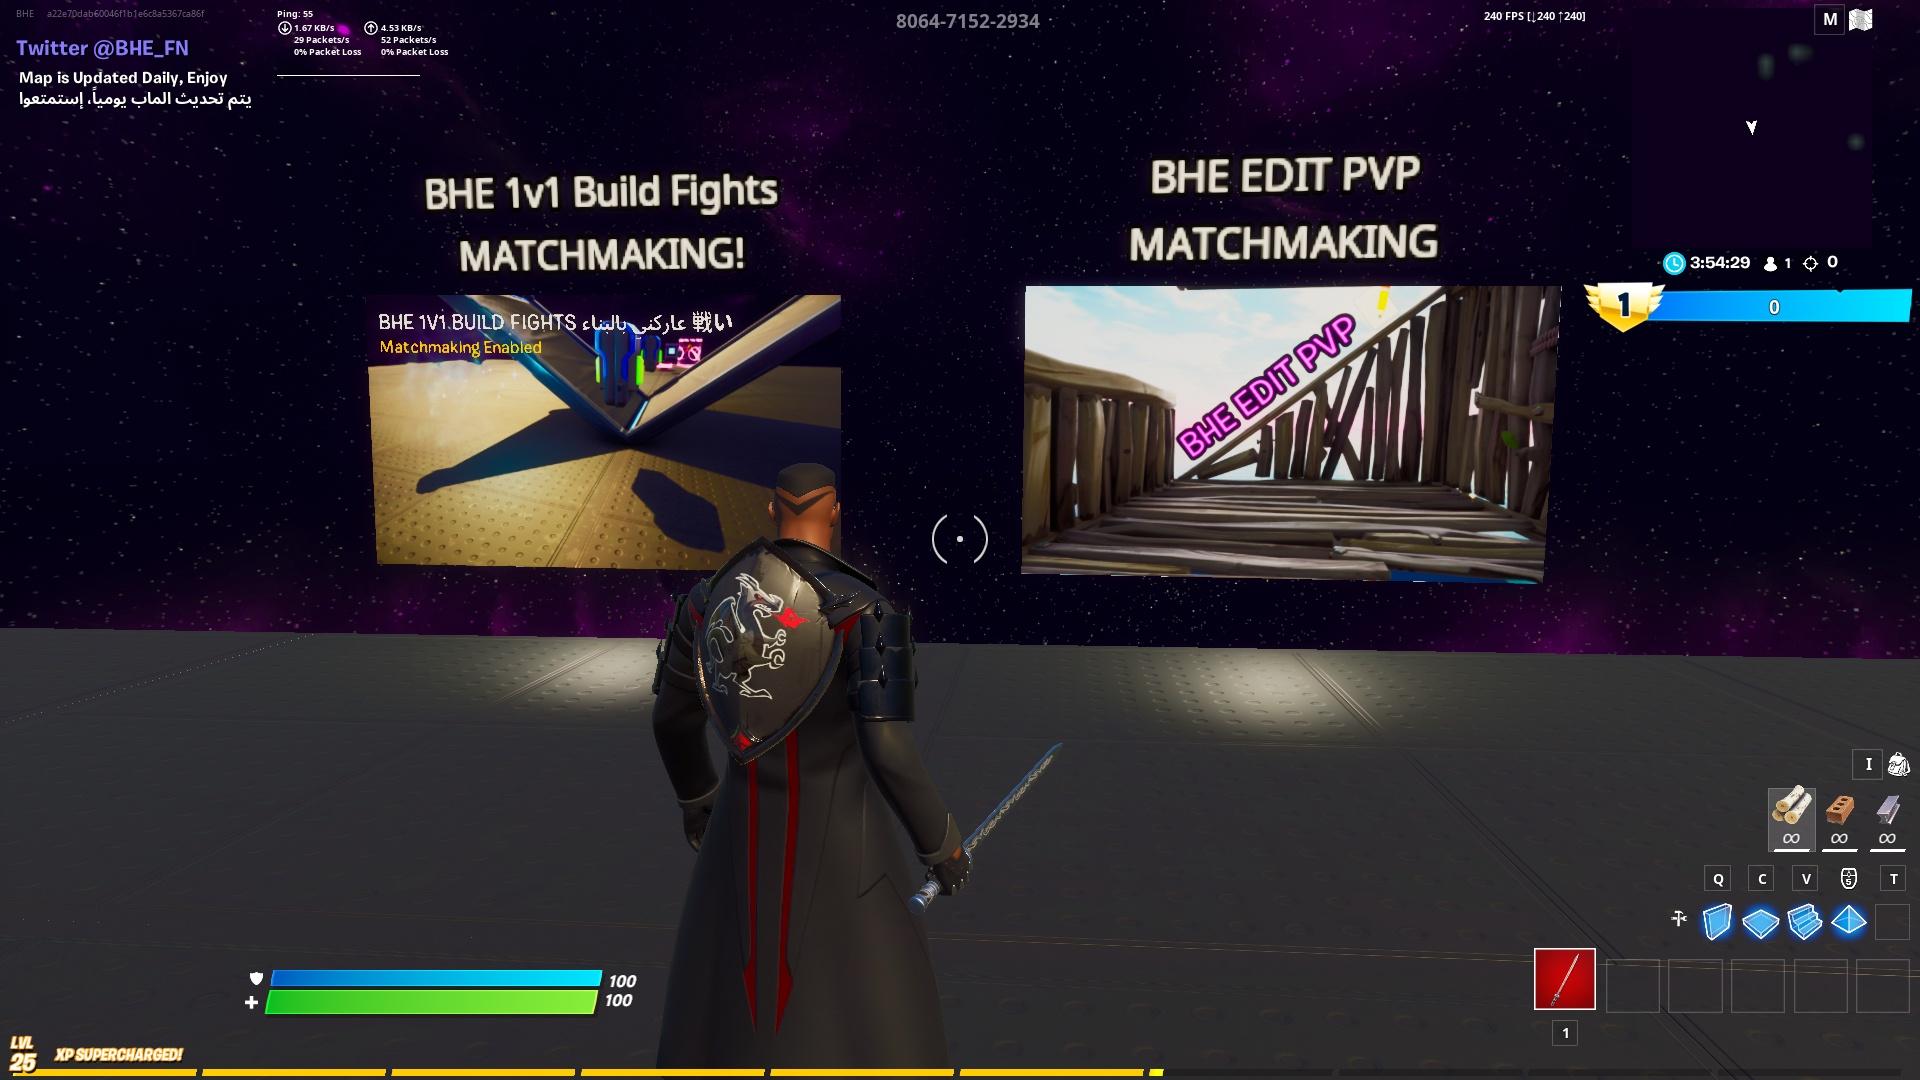 Bhe A Twitter Matchmaking Is Now Enabled For The 1v1 Build Fight Map And The Edit Pvp Map Still In Testing Phase If You Encounter Any Bugs Or Issues Feel Free To